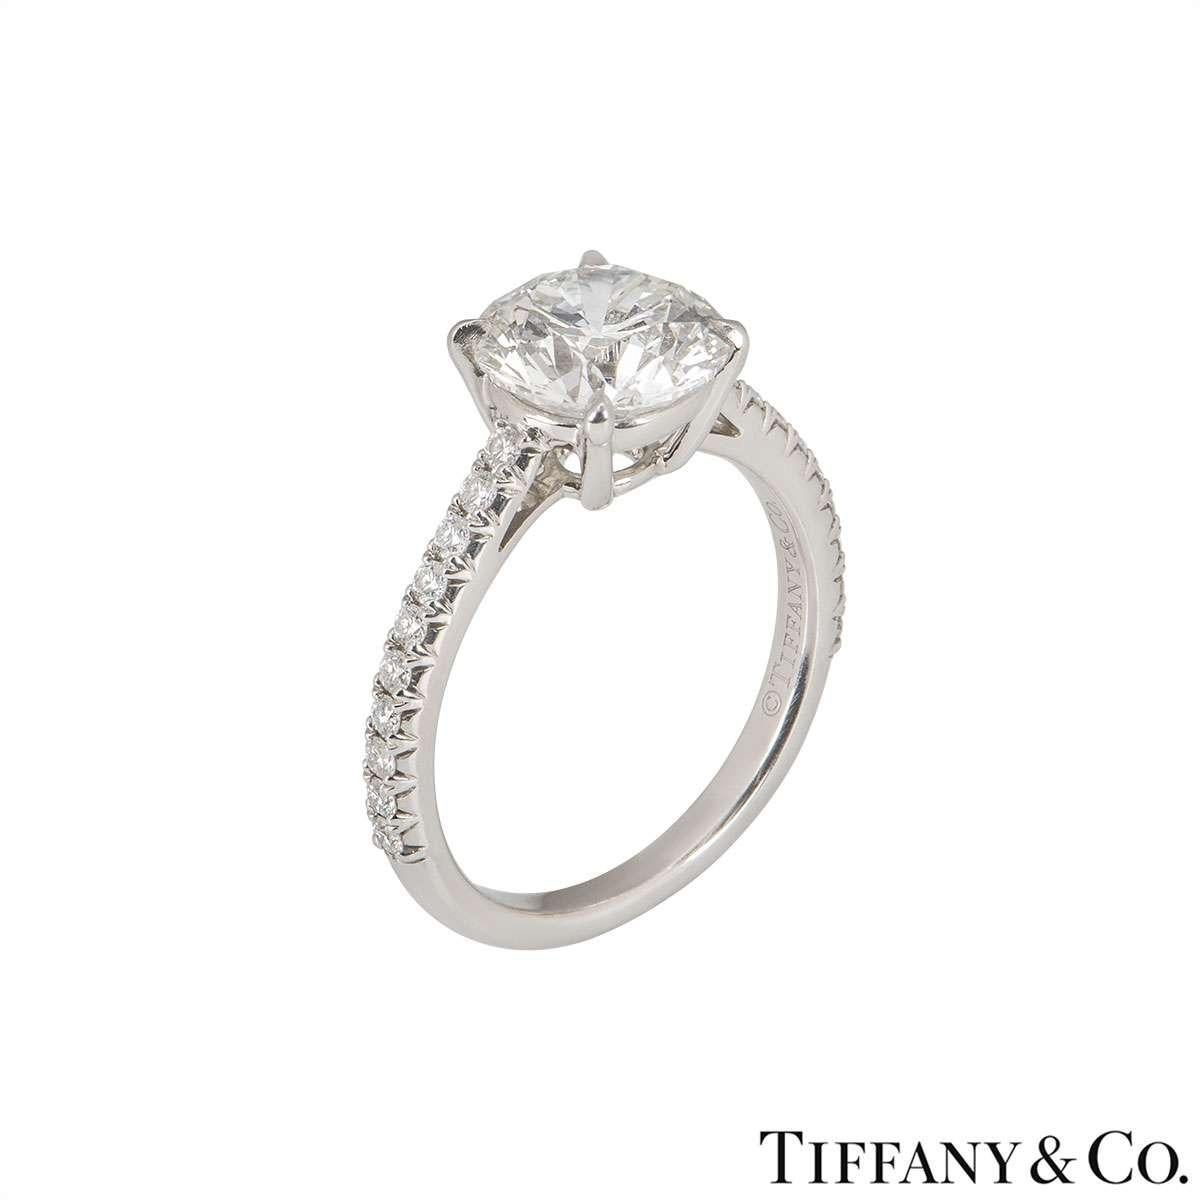 A platinum diamond ring by Tiffany & Co. from the Novo collection. The ring comprises of a round brilliant cut diamond set to the centre in a 4 claw setting with a weight of 1.72ct, G colour and VS1 clarity. The diamond scores an excellent rating in